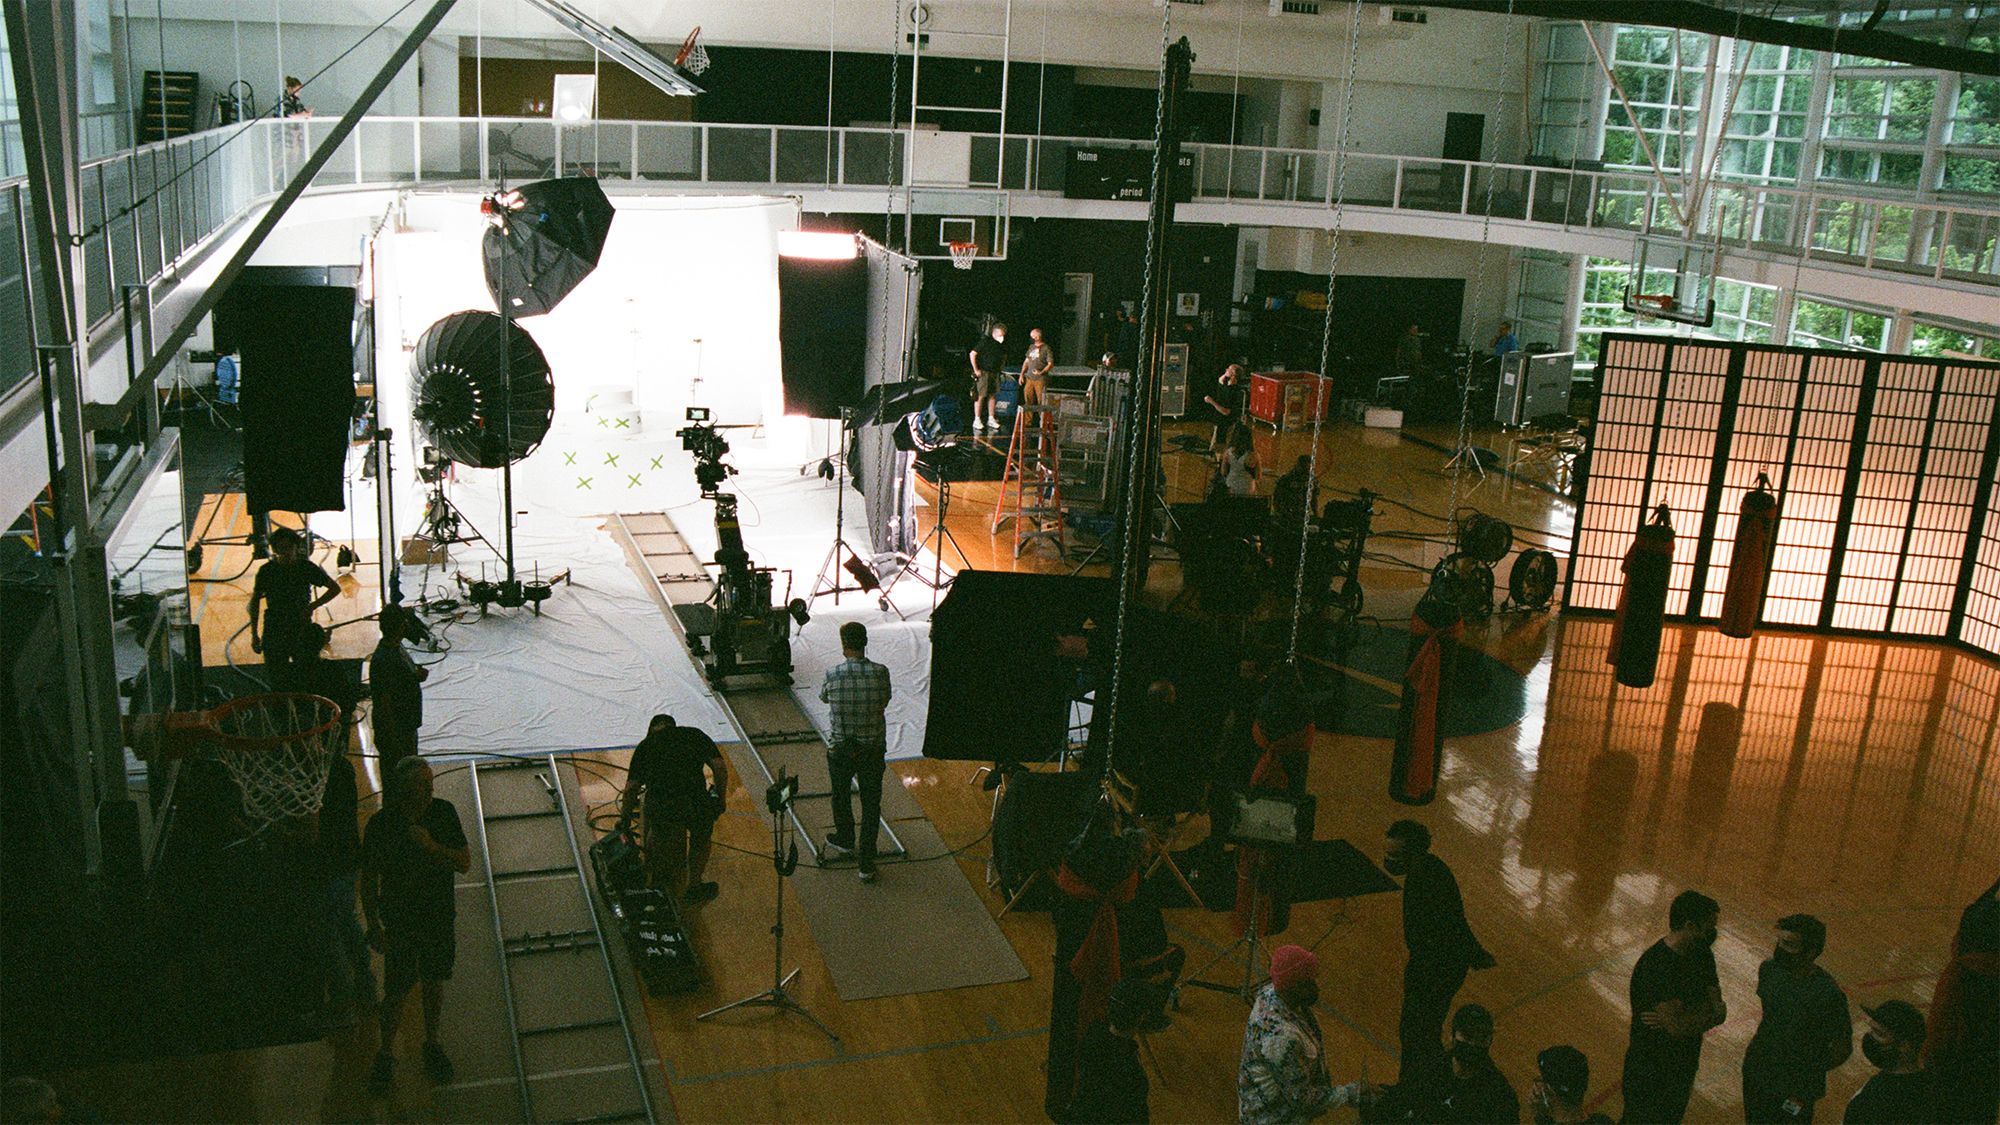 wide shot from above basketball court shoot showing large crew and multiple cameras and lighting